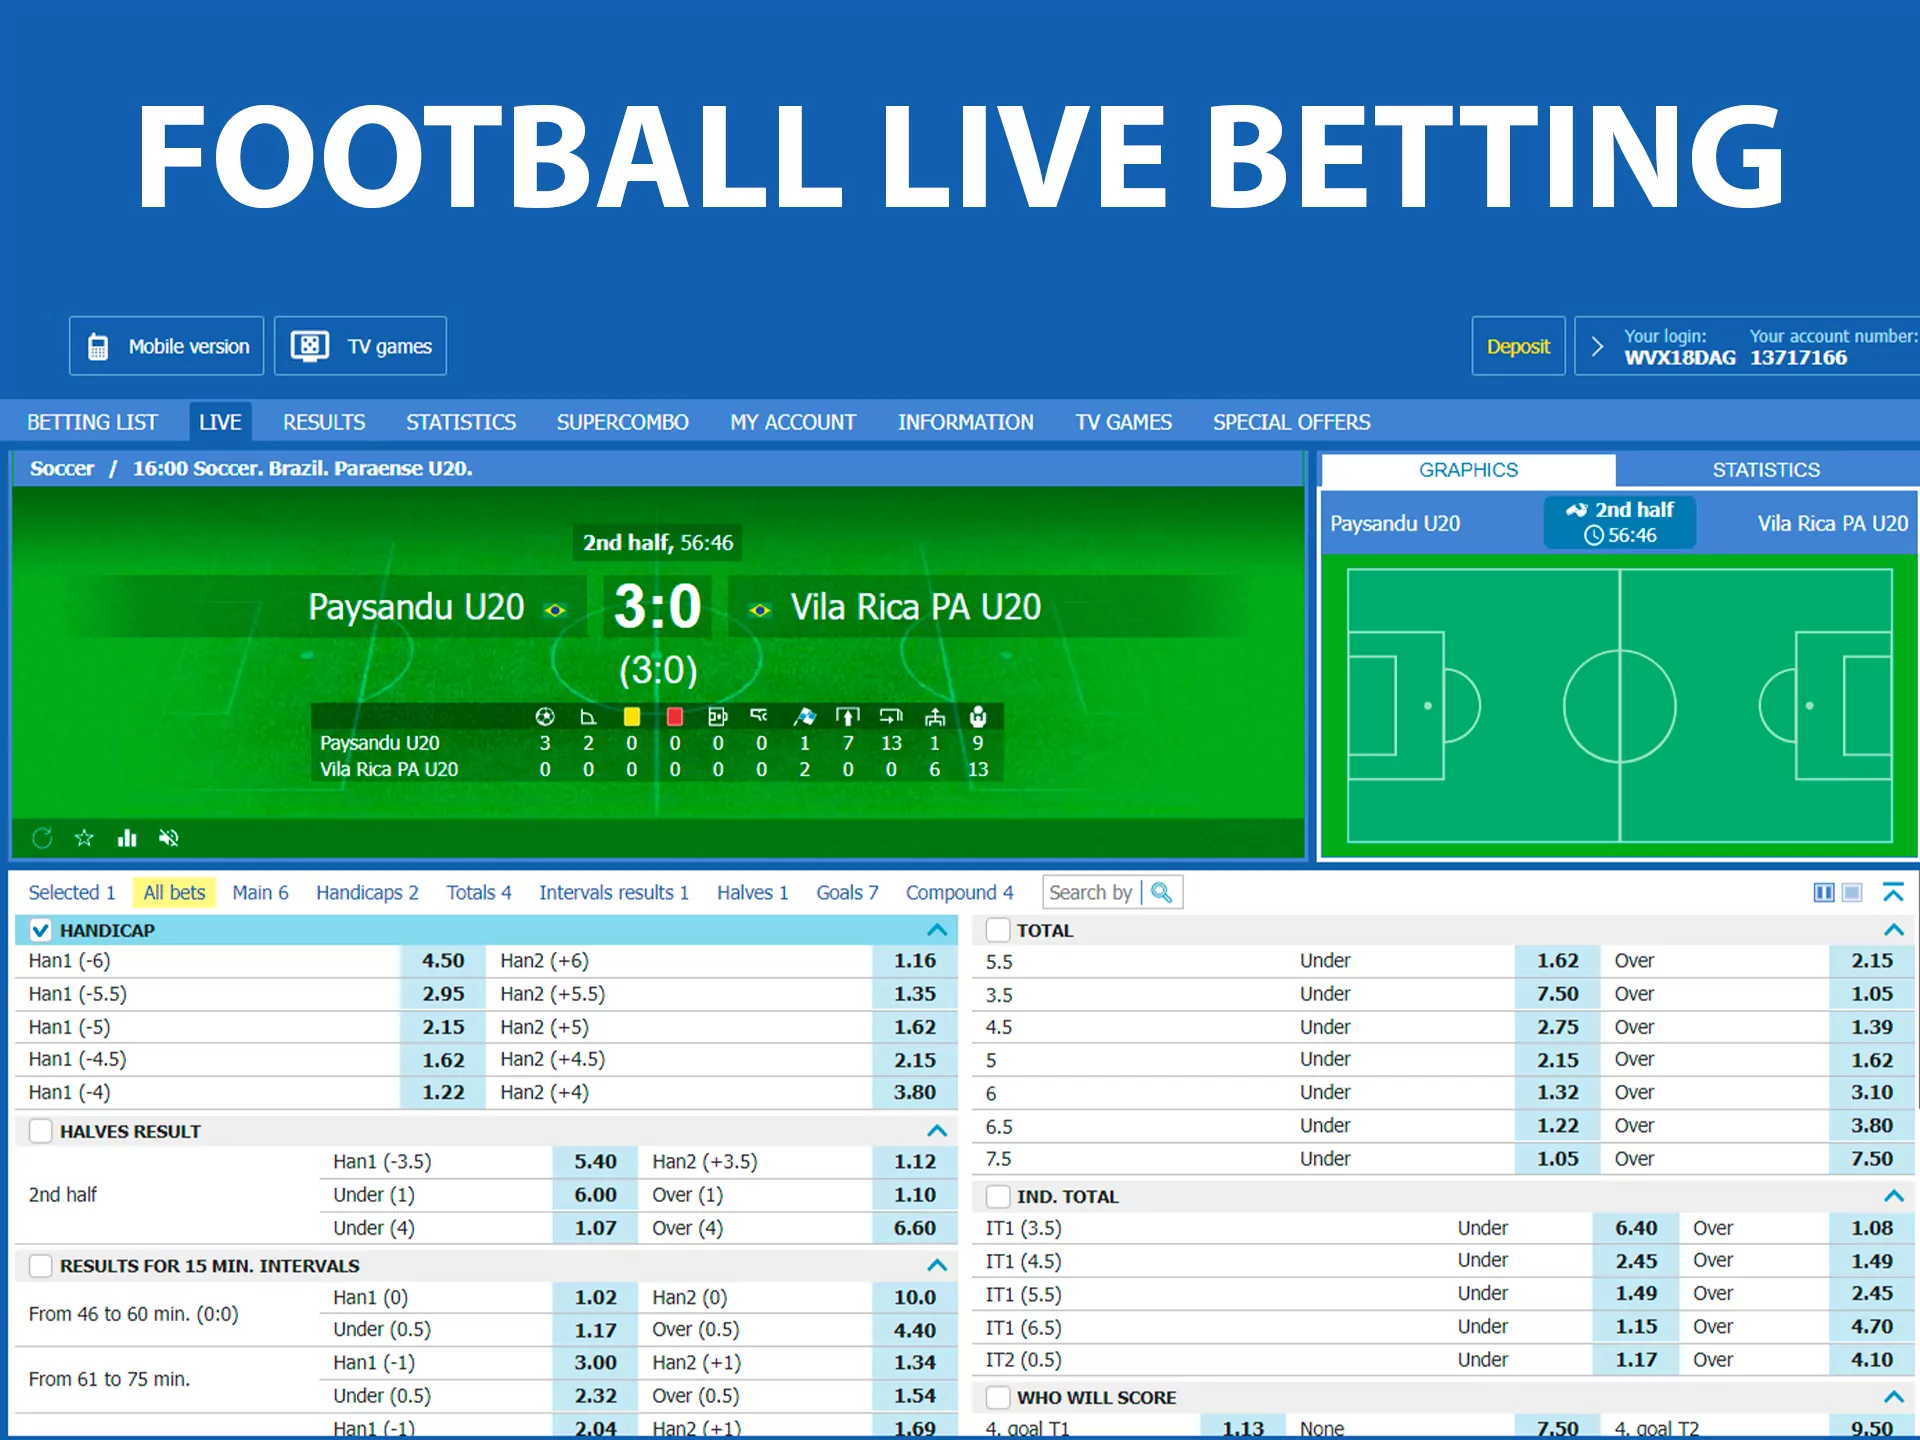 You can also place live bets while watching football streamings at Betcity.